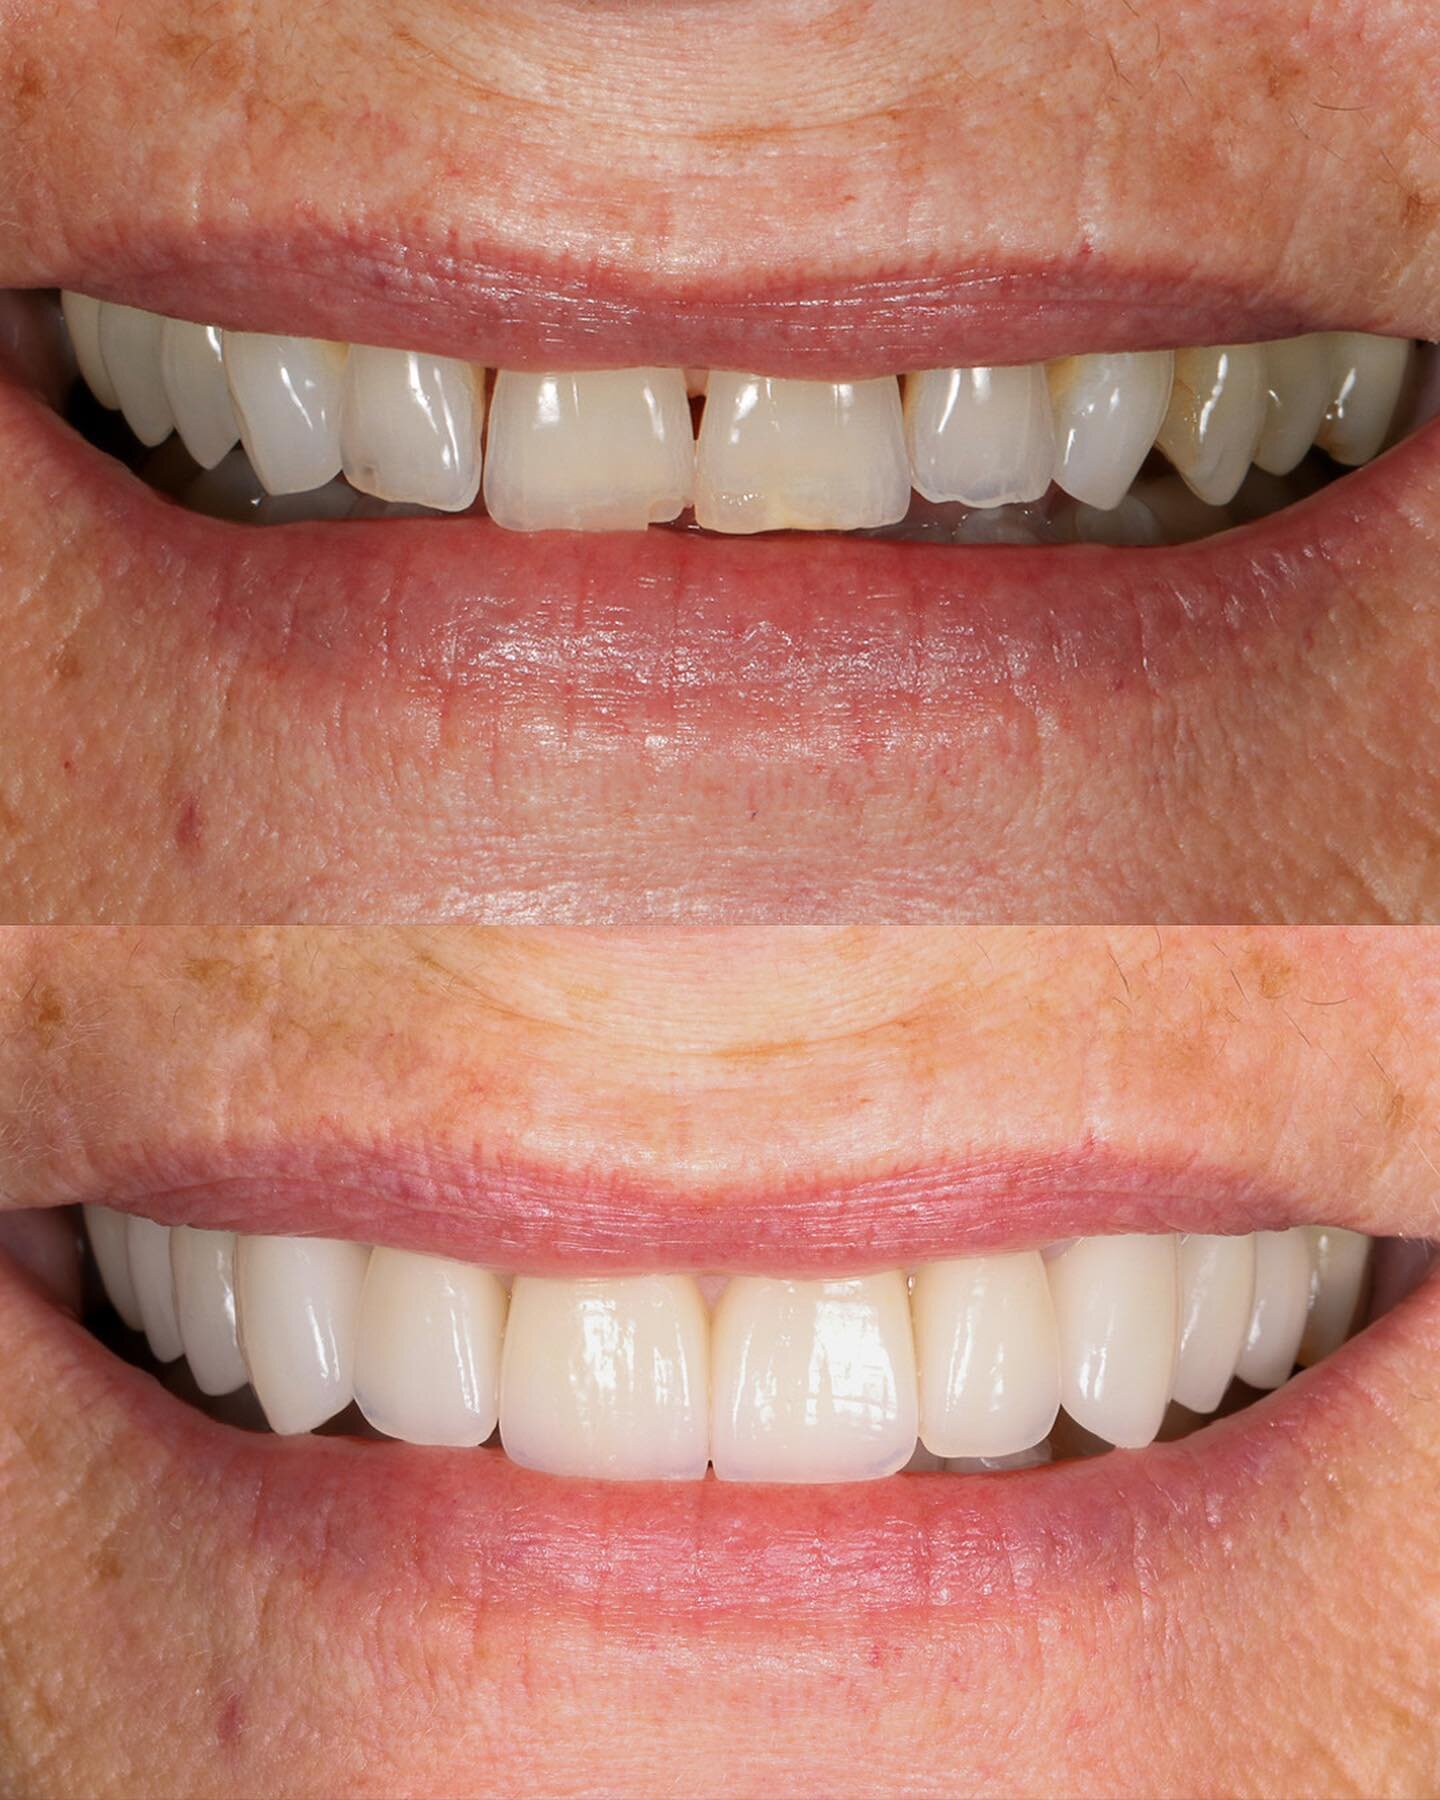 Mix of crowns and veneers to improve an aged smile to a more youthful but still natural smile. Black triangles were fixed, worn incisal edges, and abfractions. While maintaining the same overall shapes, texture and translucency. 

Great work by @gil_